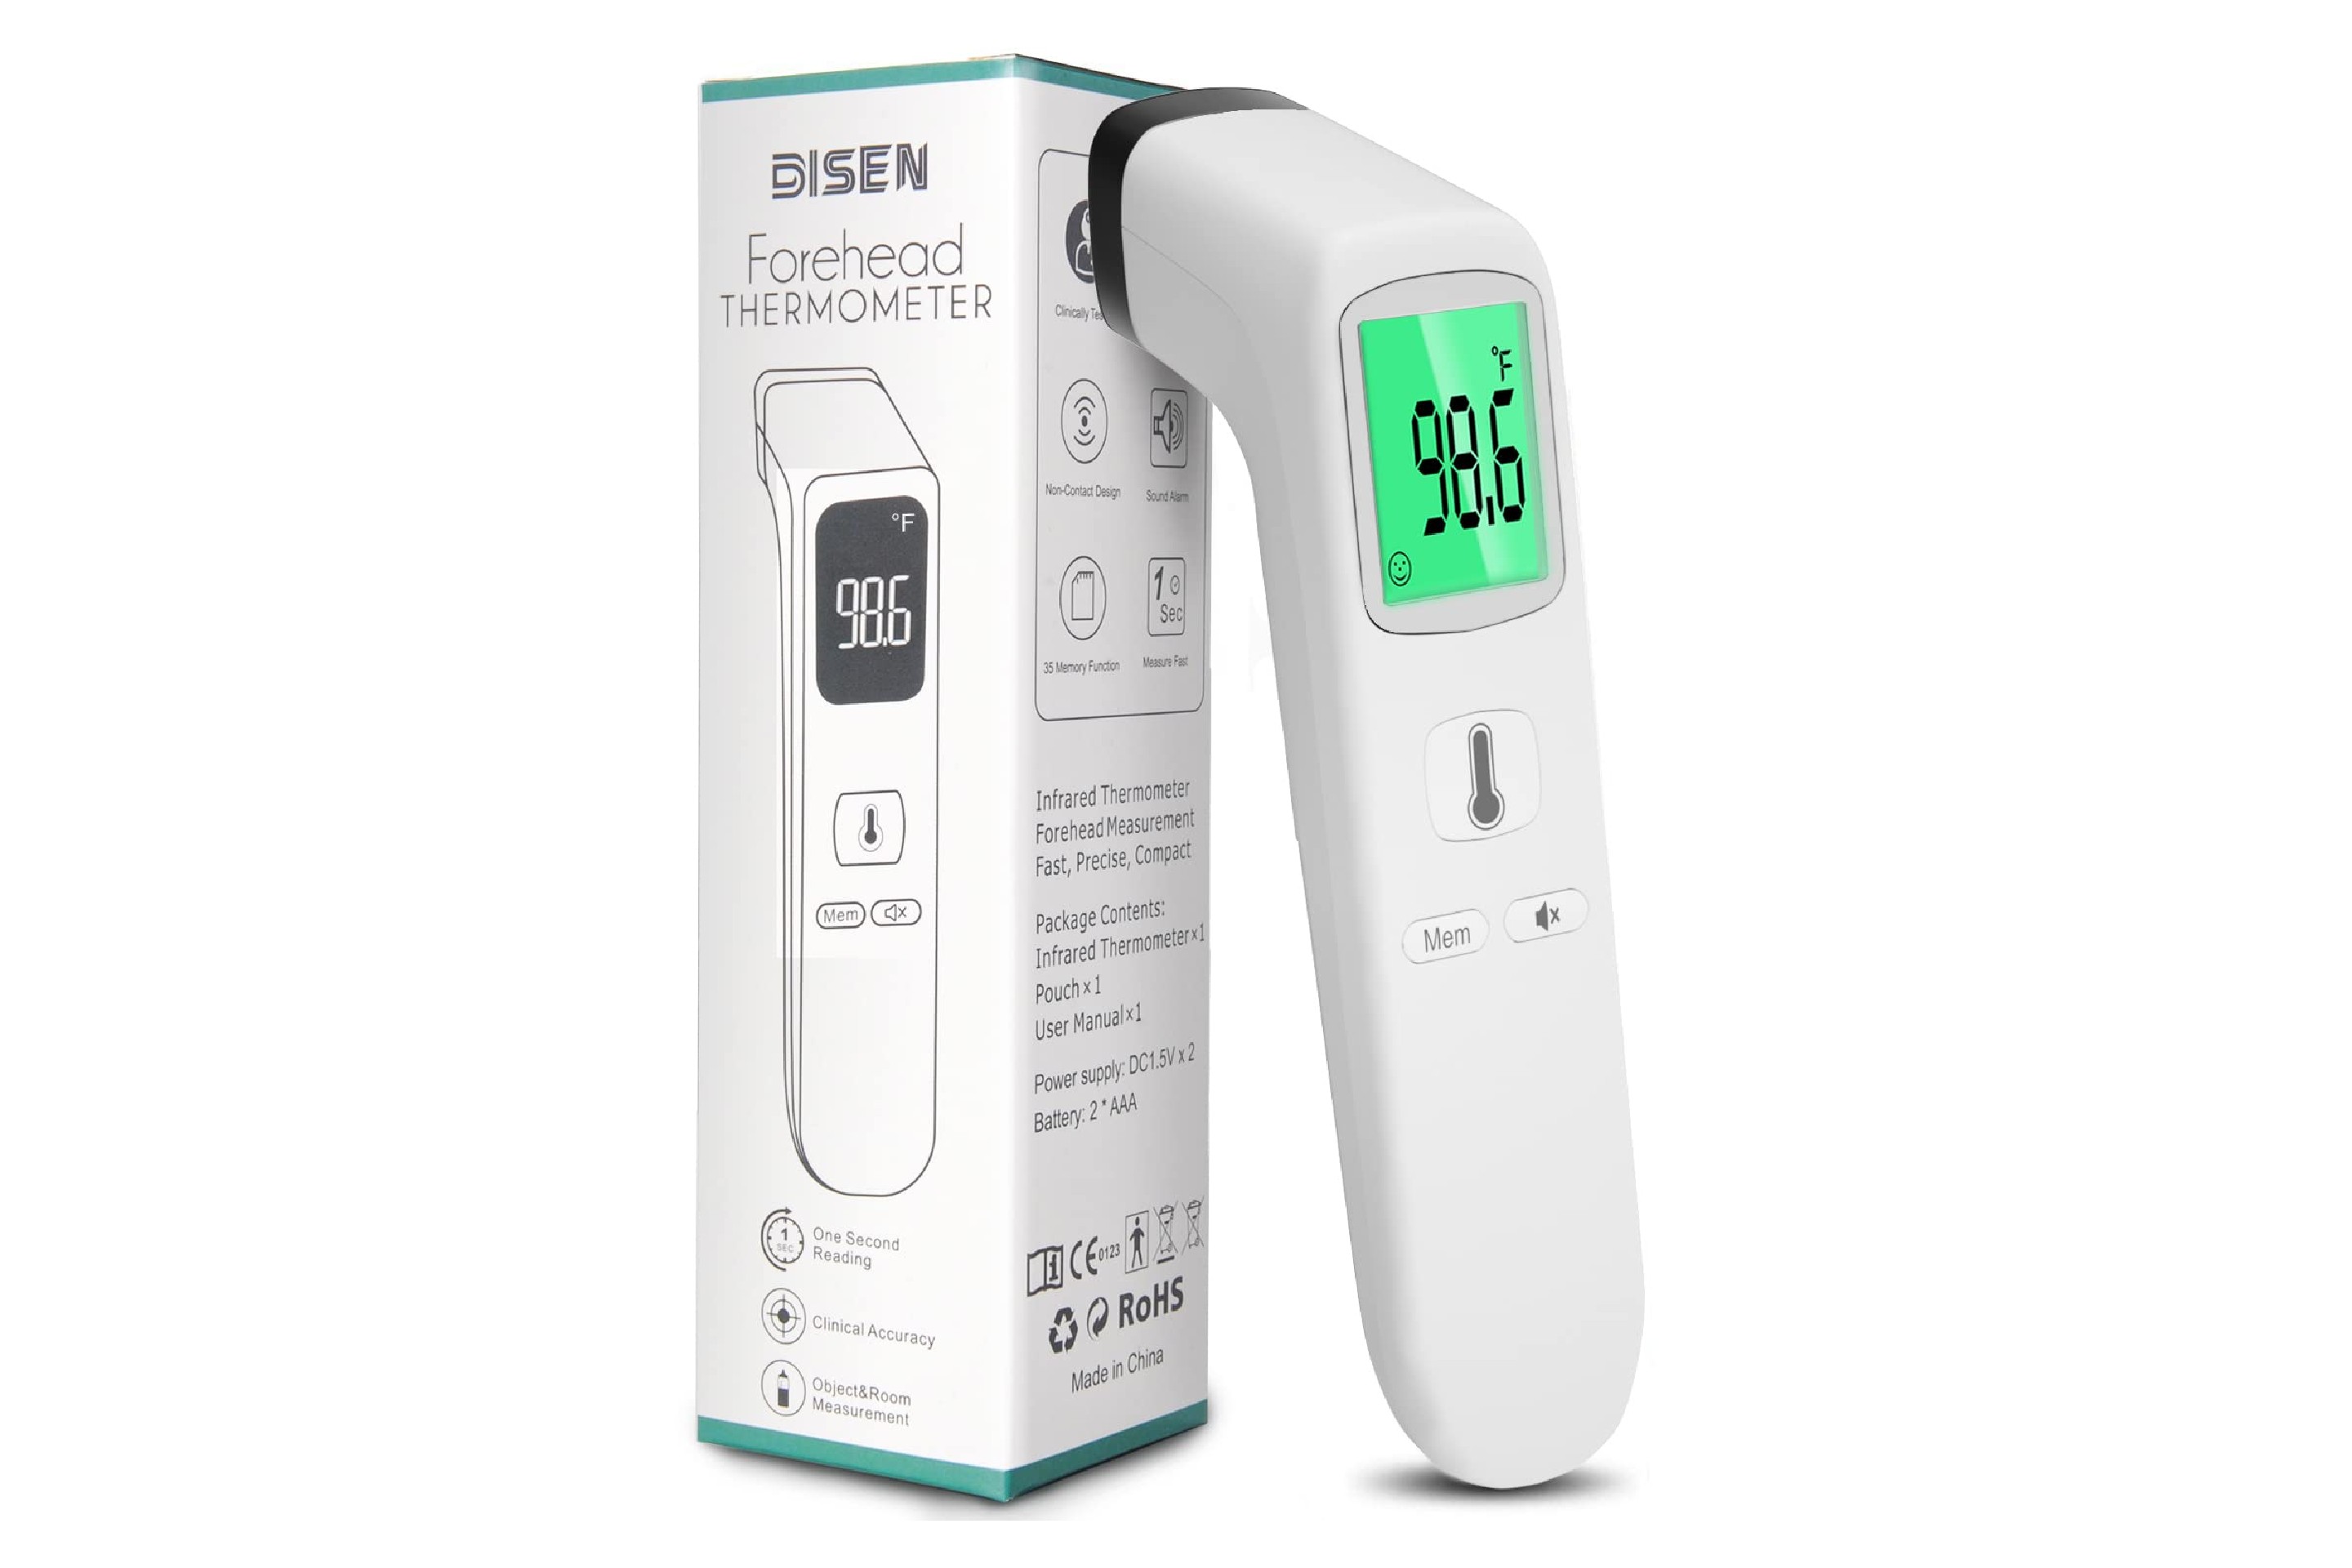 DISEN Non-Contact Forehead Thermometer